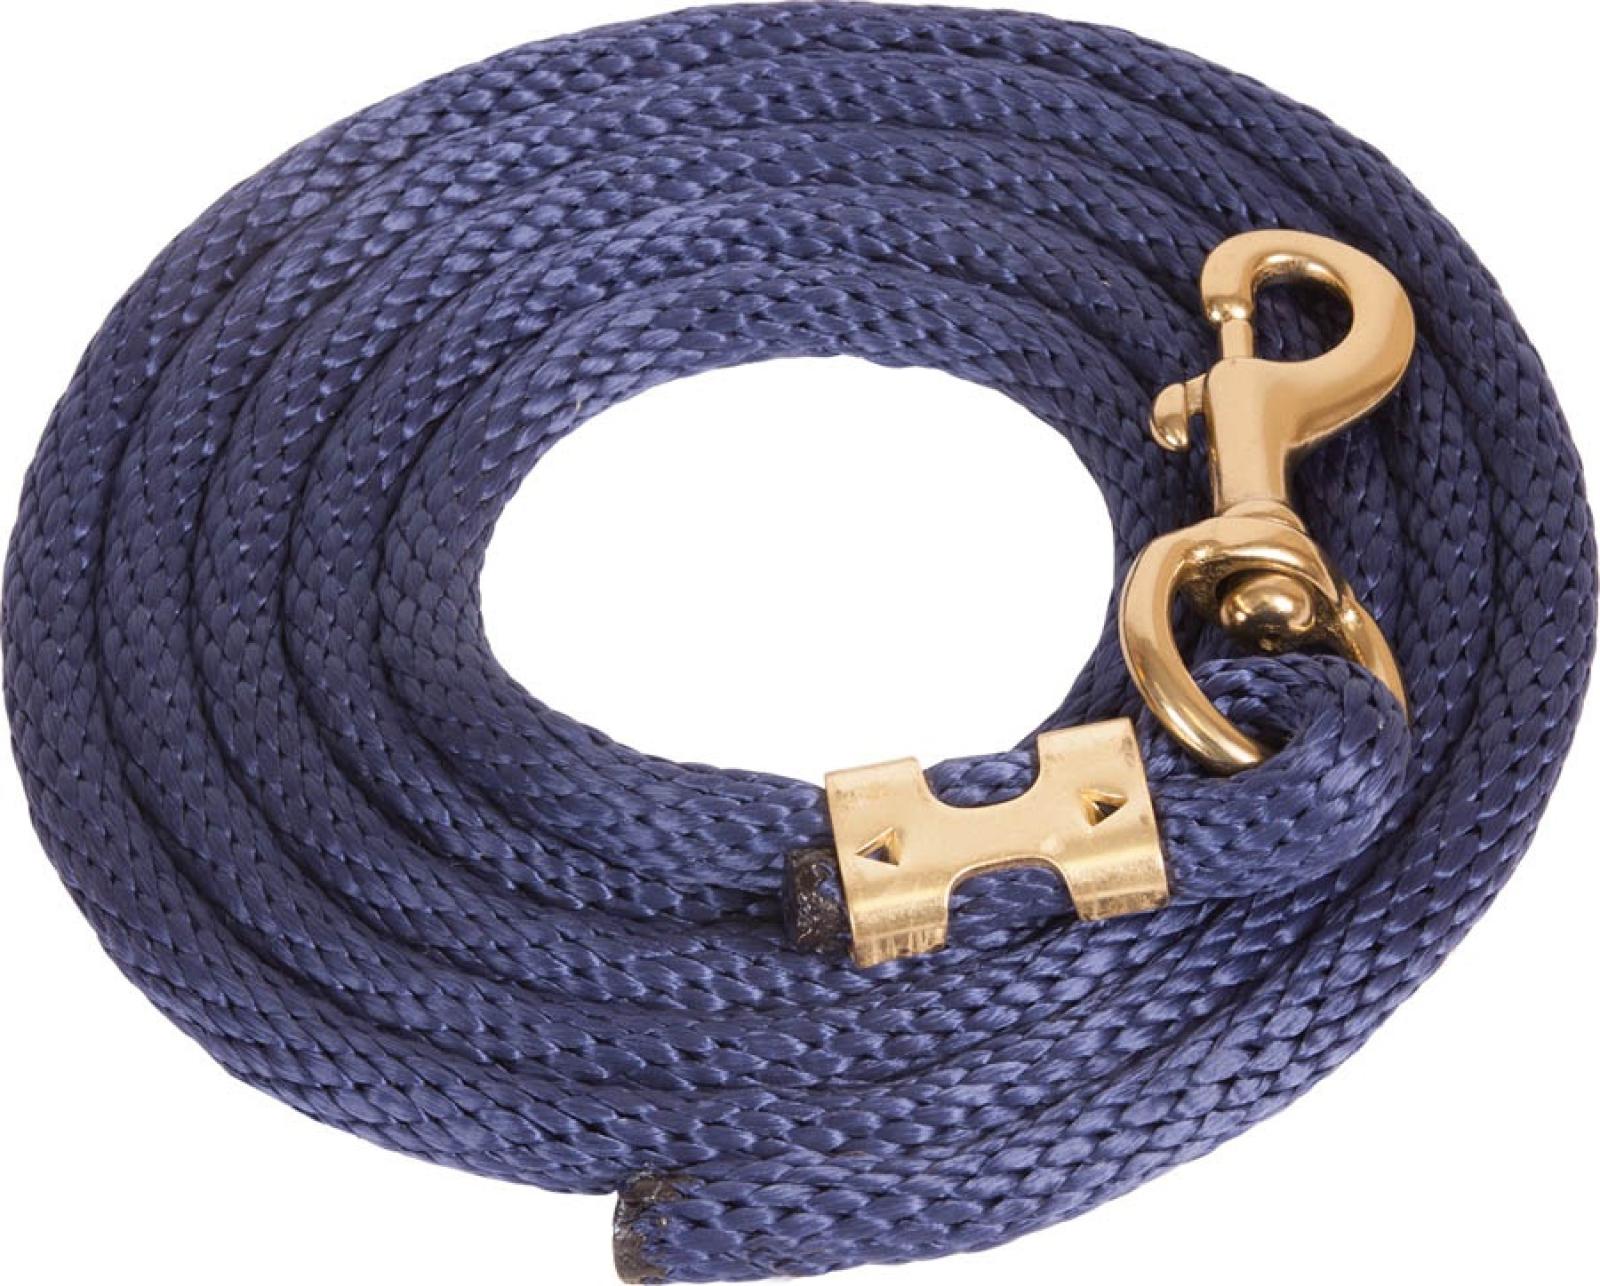 Mustang Poly Lead Rope